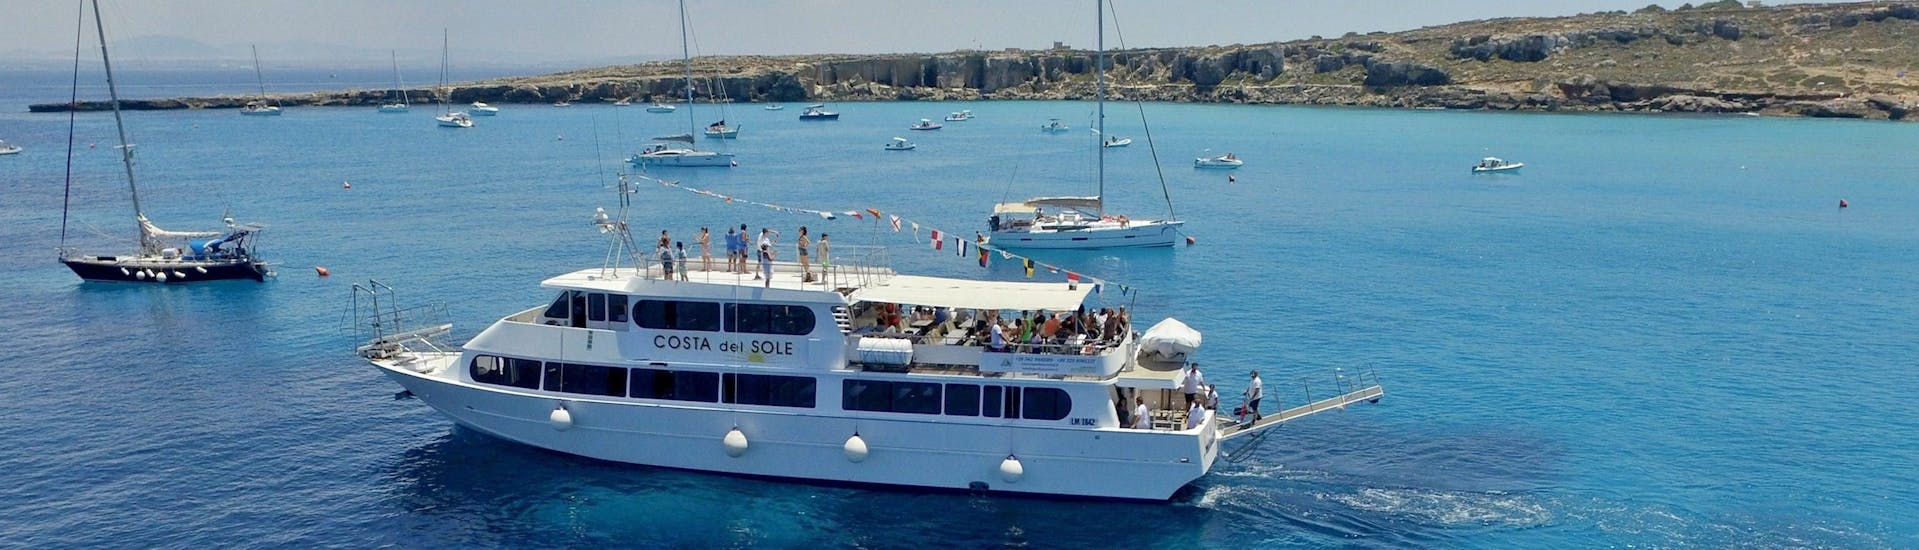 View of a boat in the clear waters of Favignana during the Boat Trip to Favignana's creeks with Egadi Escursioni.